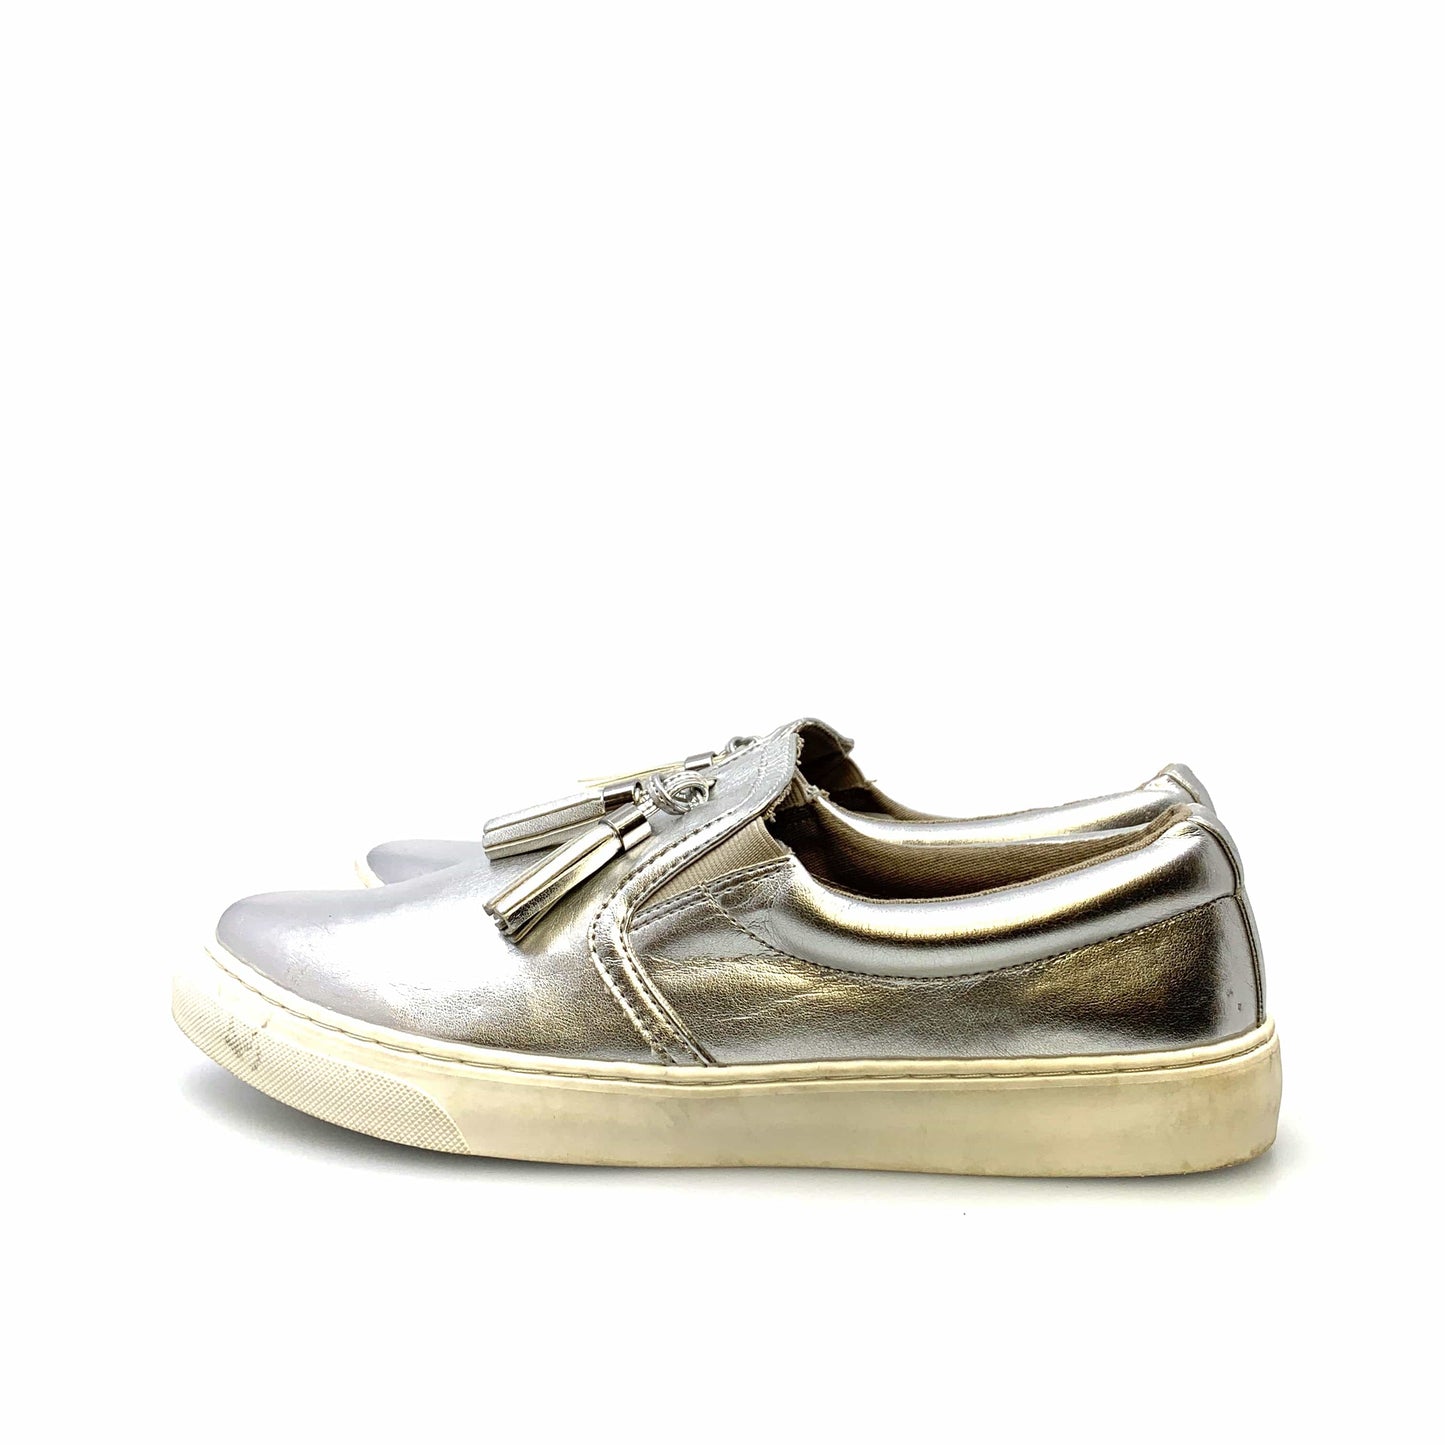 SODA Womens Size 11 Silver Tassled Loafer Sneakers